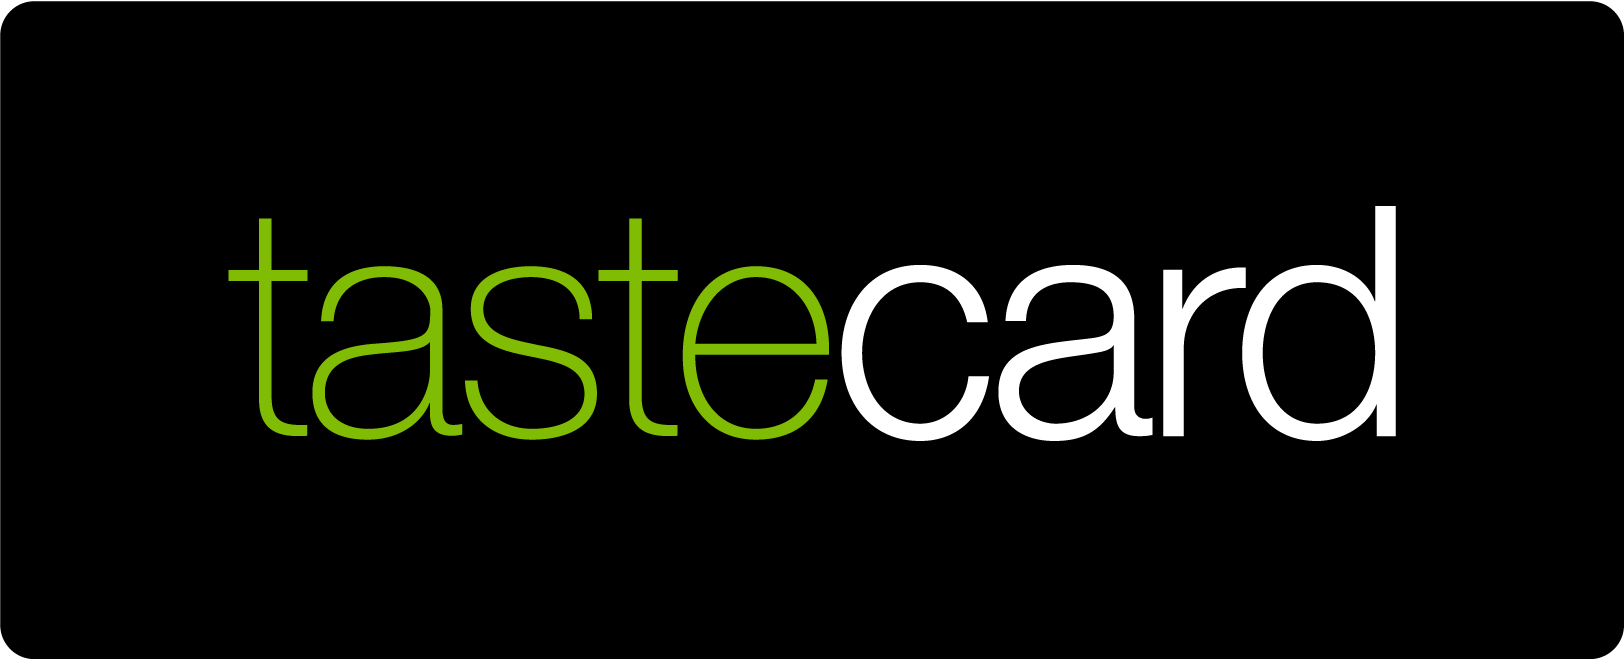 tastecard referral code refer a friend sign up